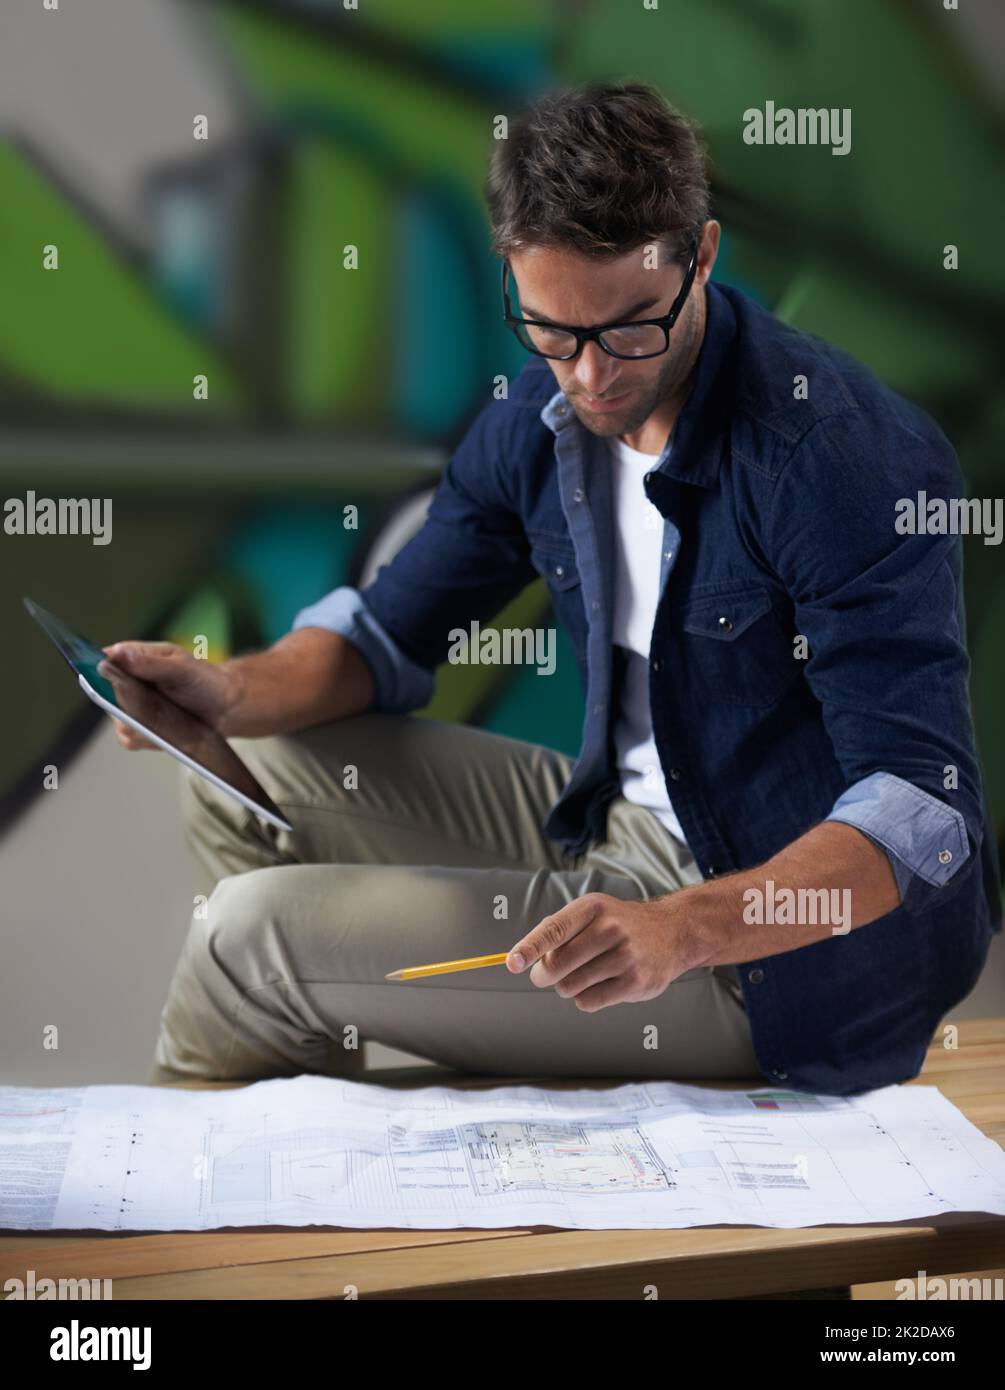 One final look at the plan before the presentation. Shot of a trendy male designer working on building plans at his desk. Stock Photo